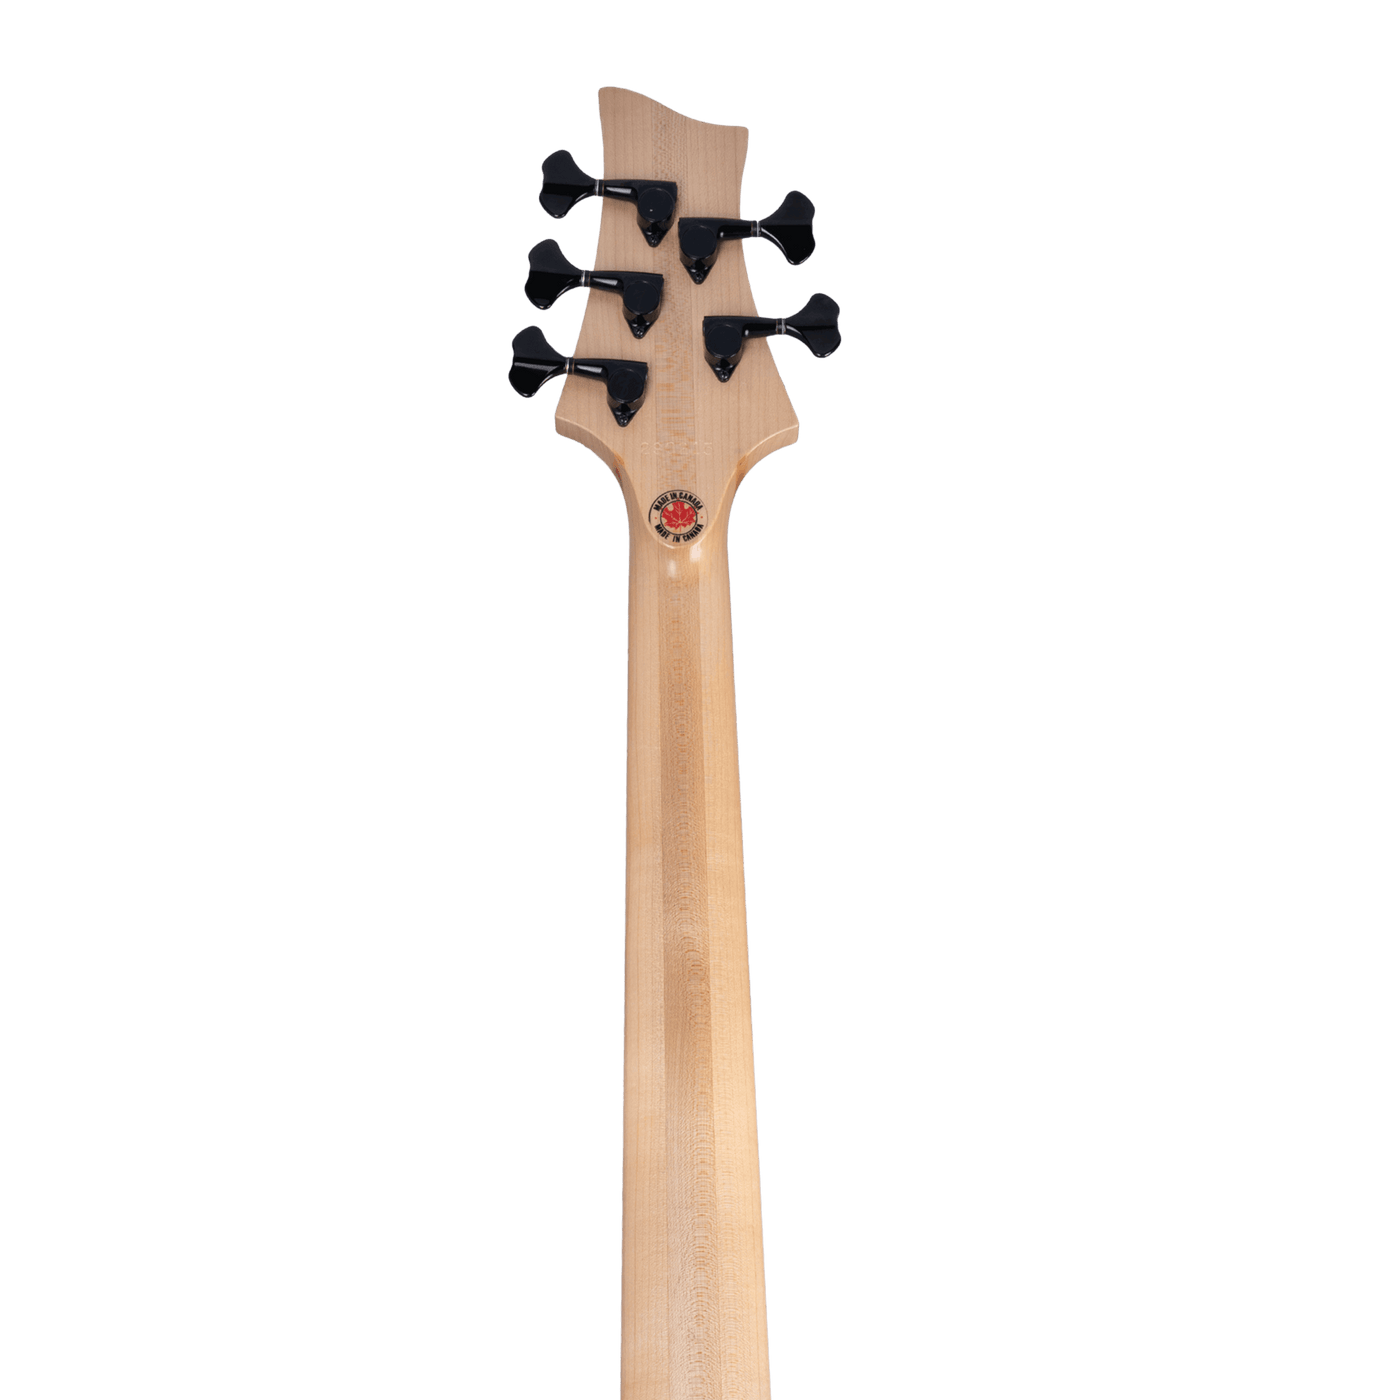 F Bass BN5 Natural 2016 - The BN series is the product of 40+ years of F Bass evolution. While it has roots stemming from the original Jazz Bass, it has slowly morphed into our signature sound, feel, and look. The BN series’ voice leans heavily on the woo